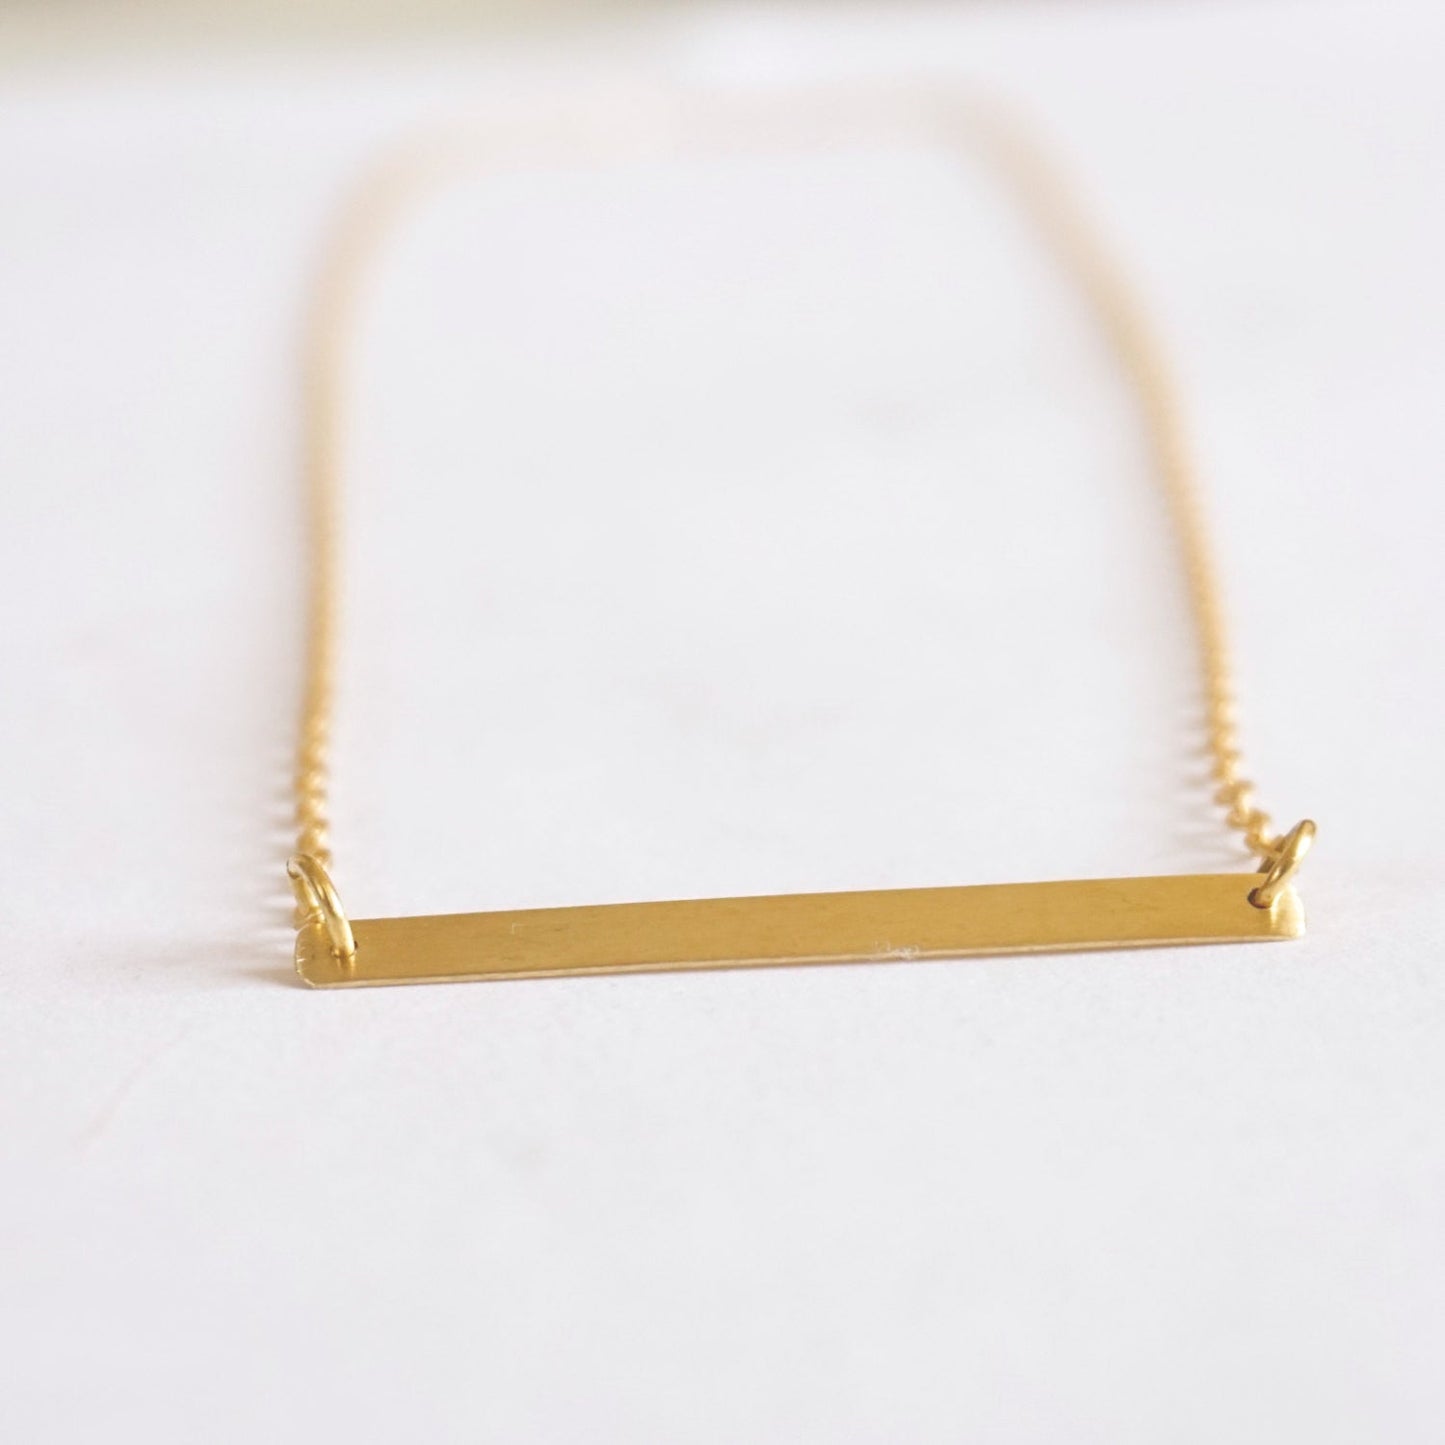 Minimalistic Nameplate Necklace with clasp brass necklace jewelry Sterling Silver bar jewelry simple geometric rectangle necklace 006 - Patination Design